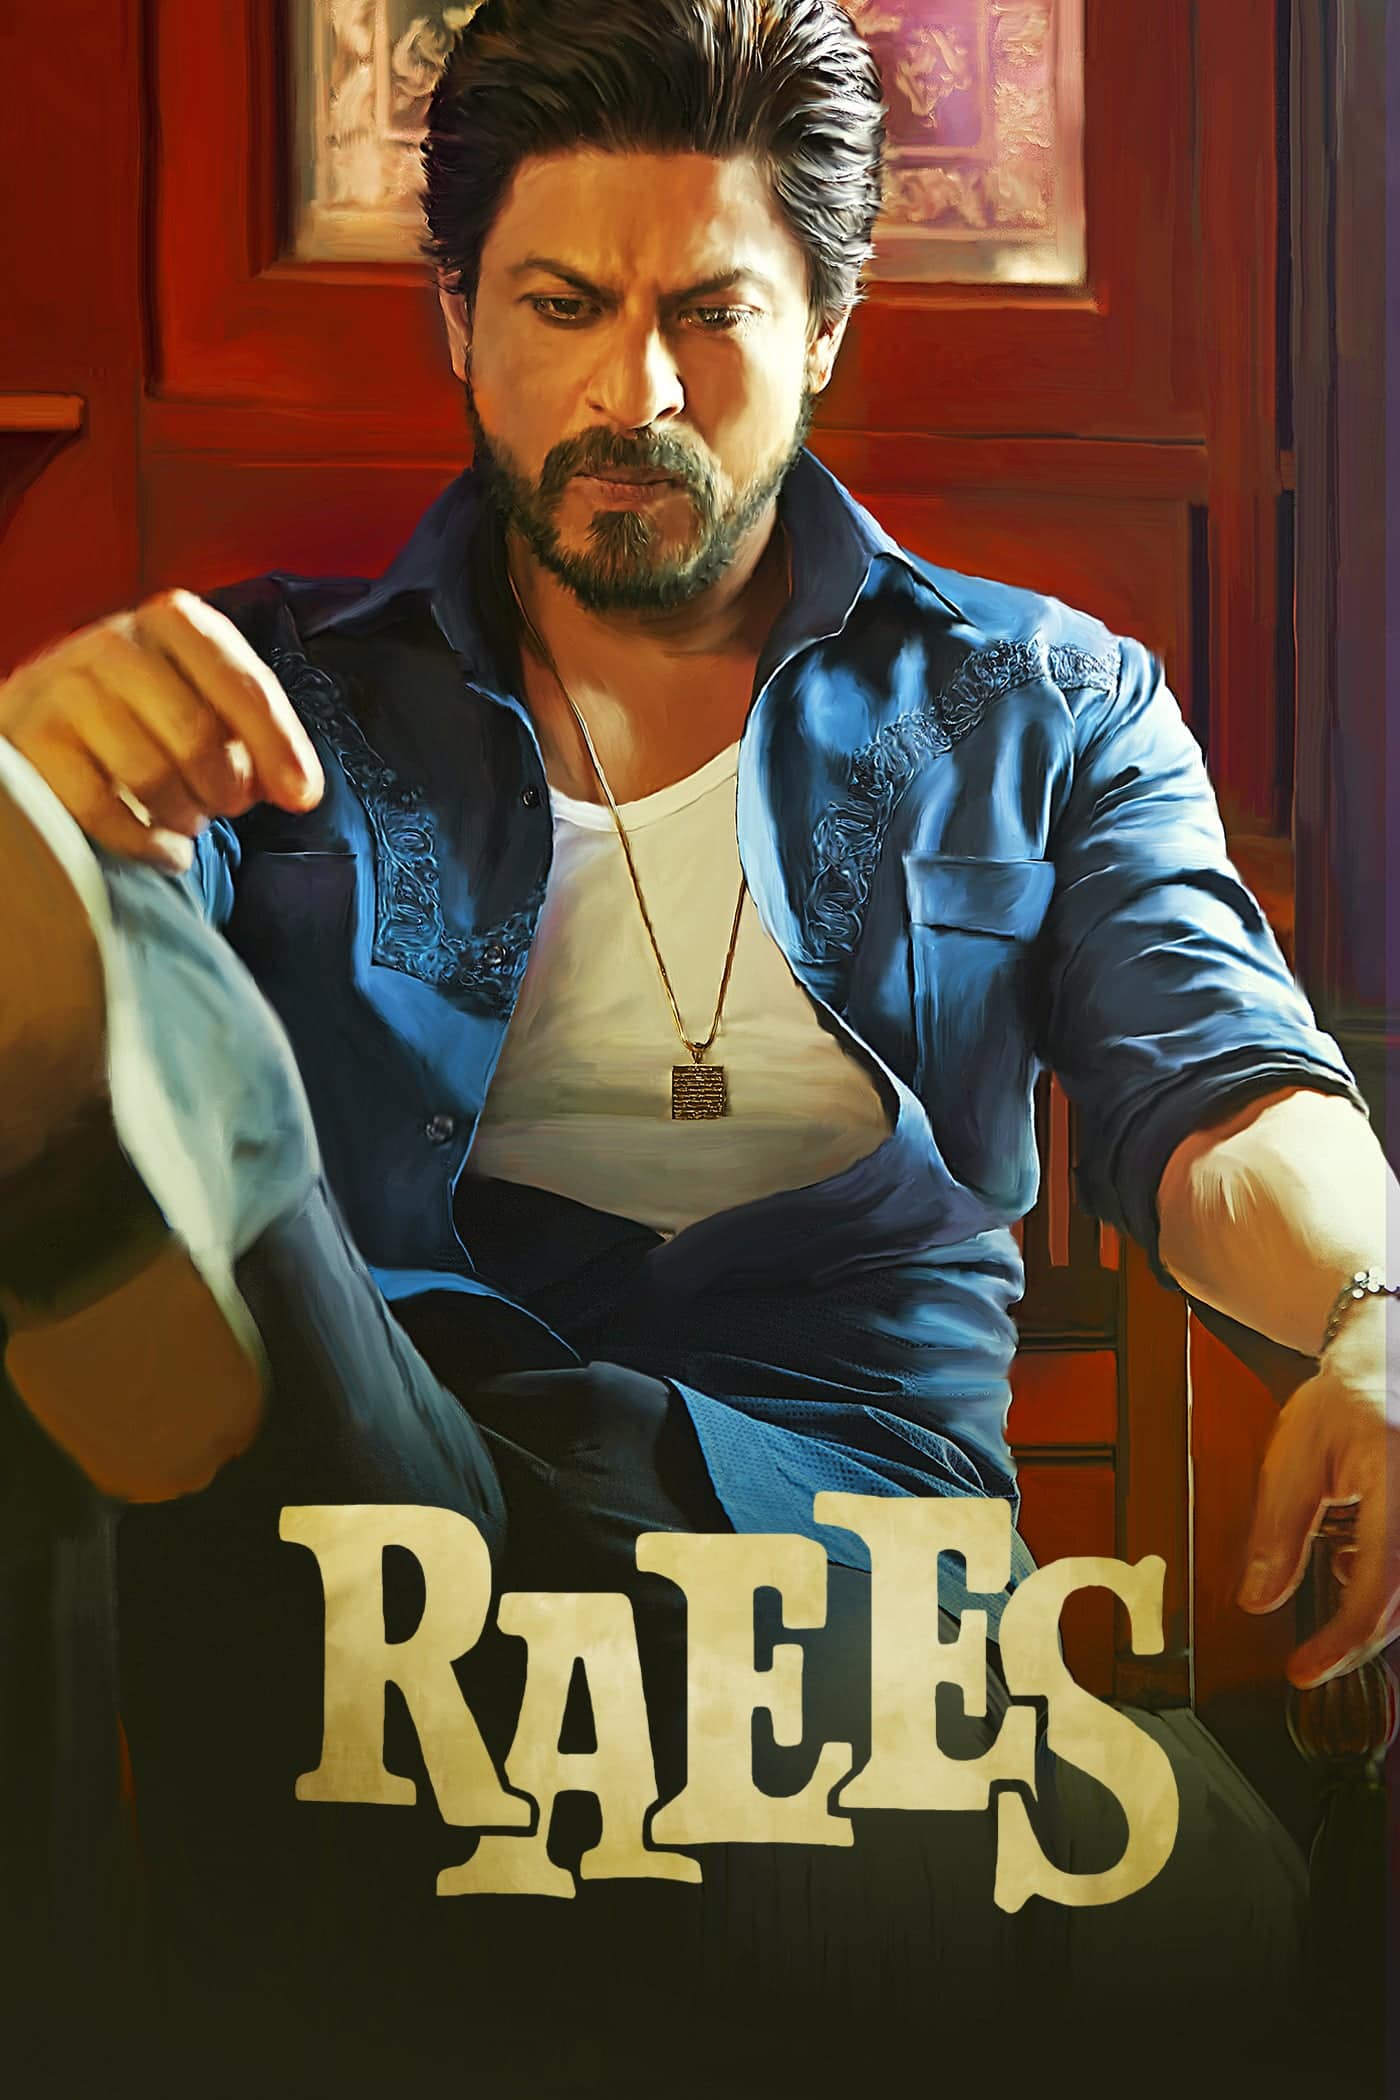 Poster for the movie "Raees"